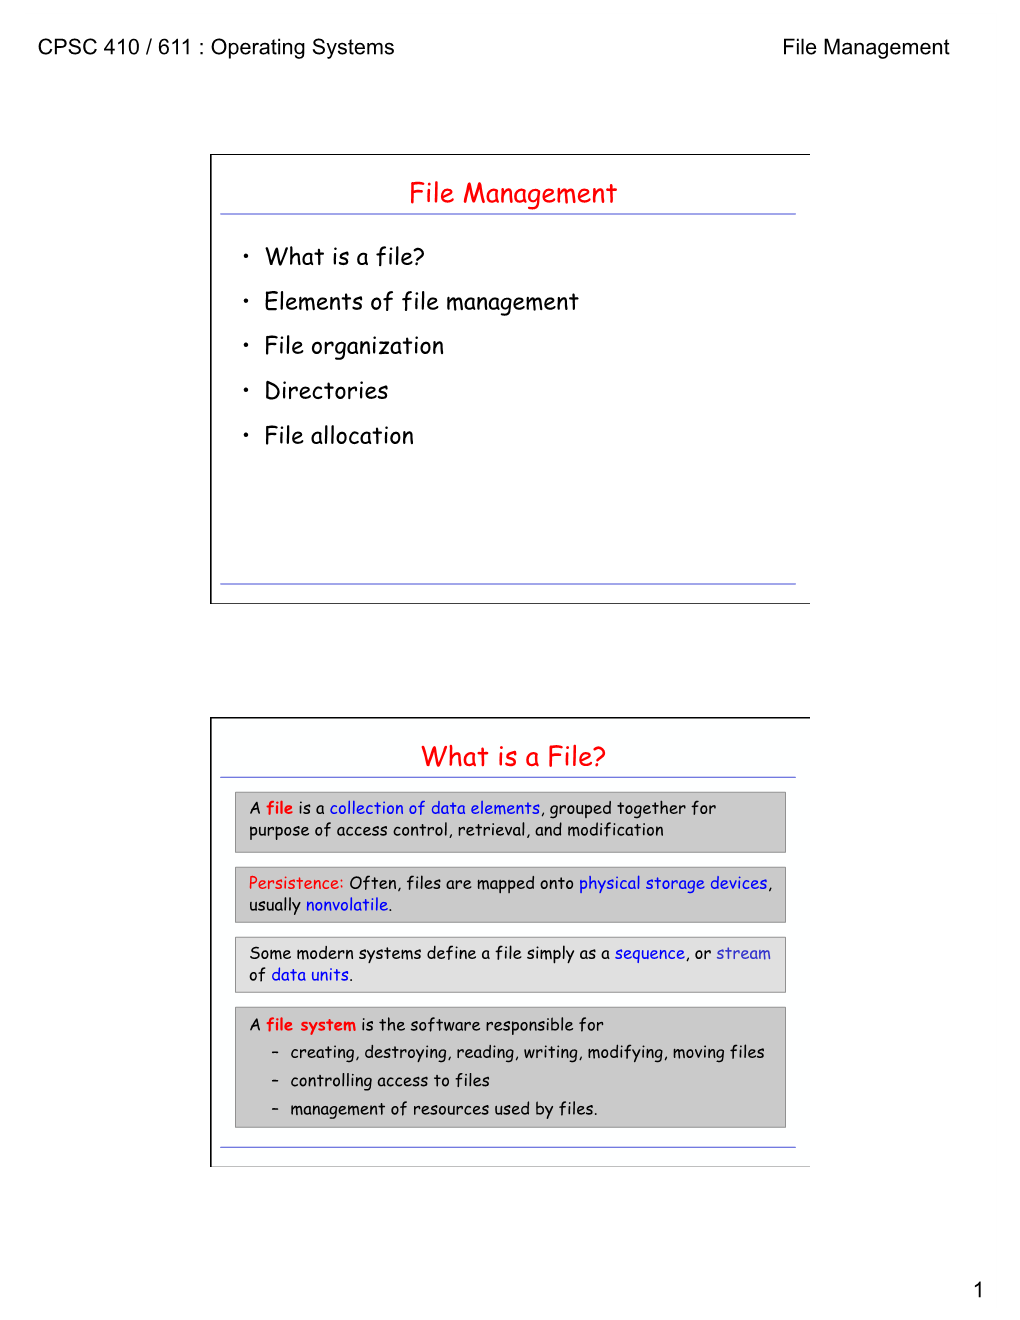 File Management What Is a File?